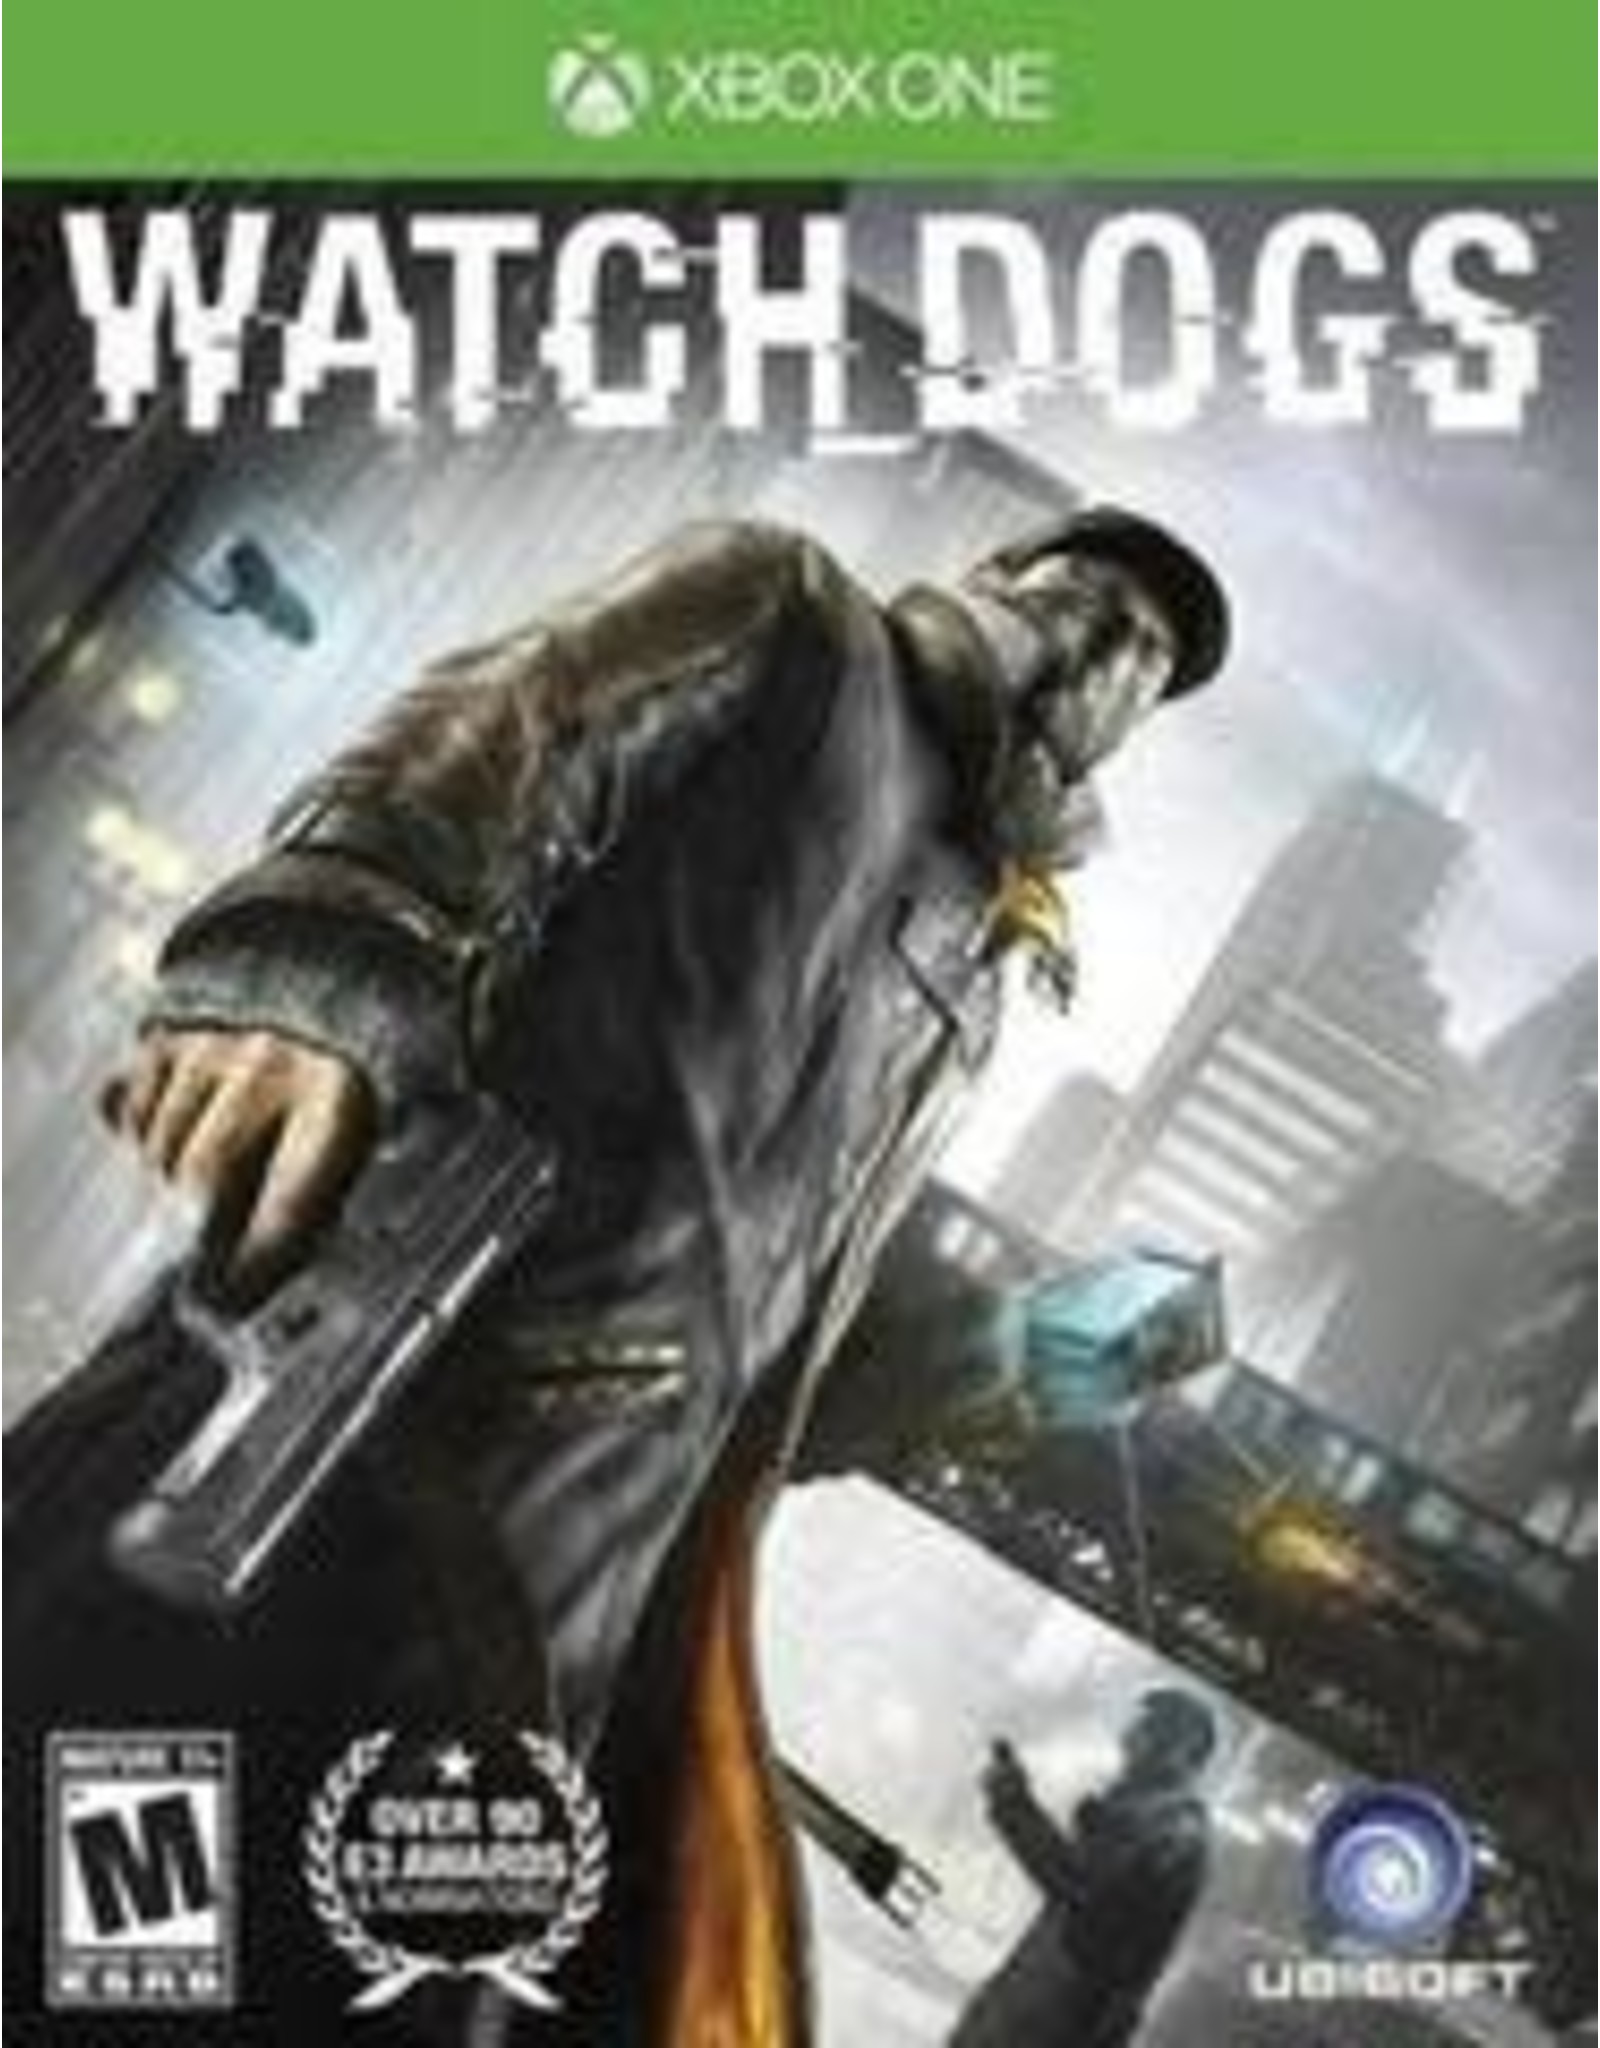 Xbox One Watch Dogs (Used)